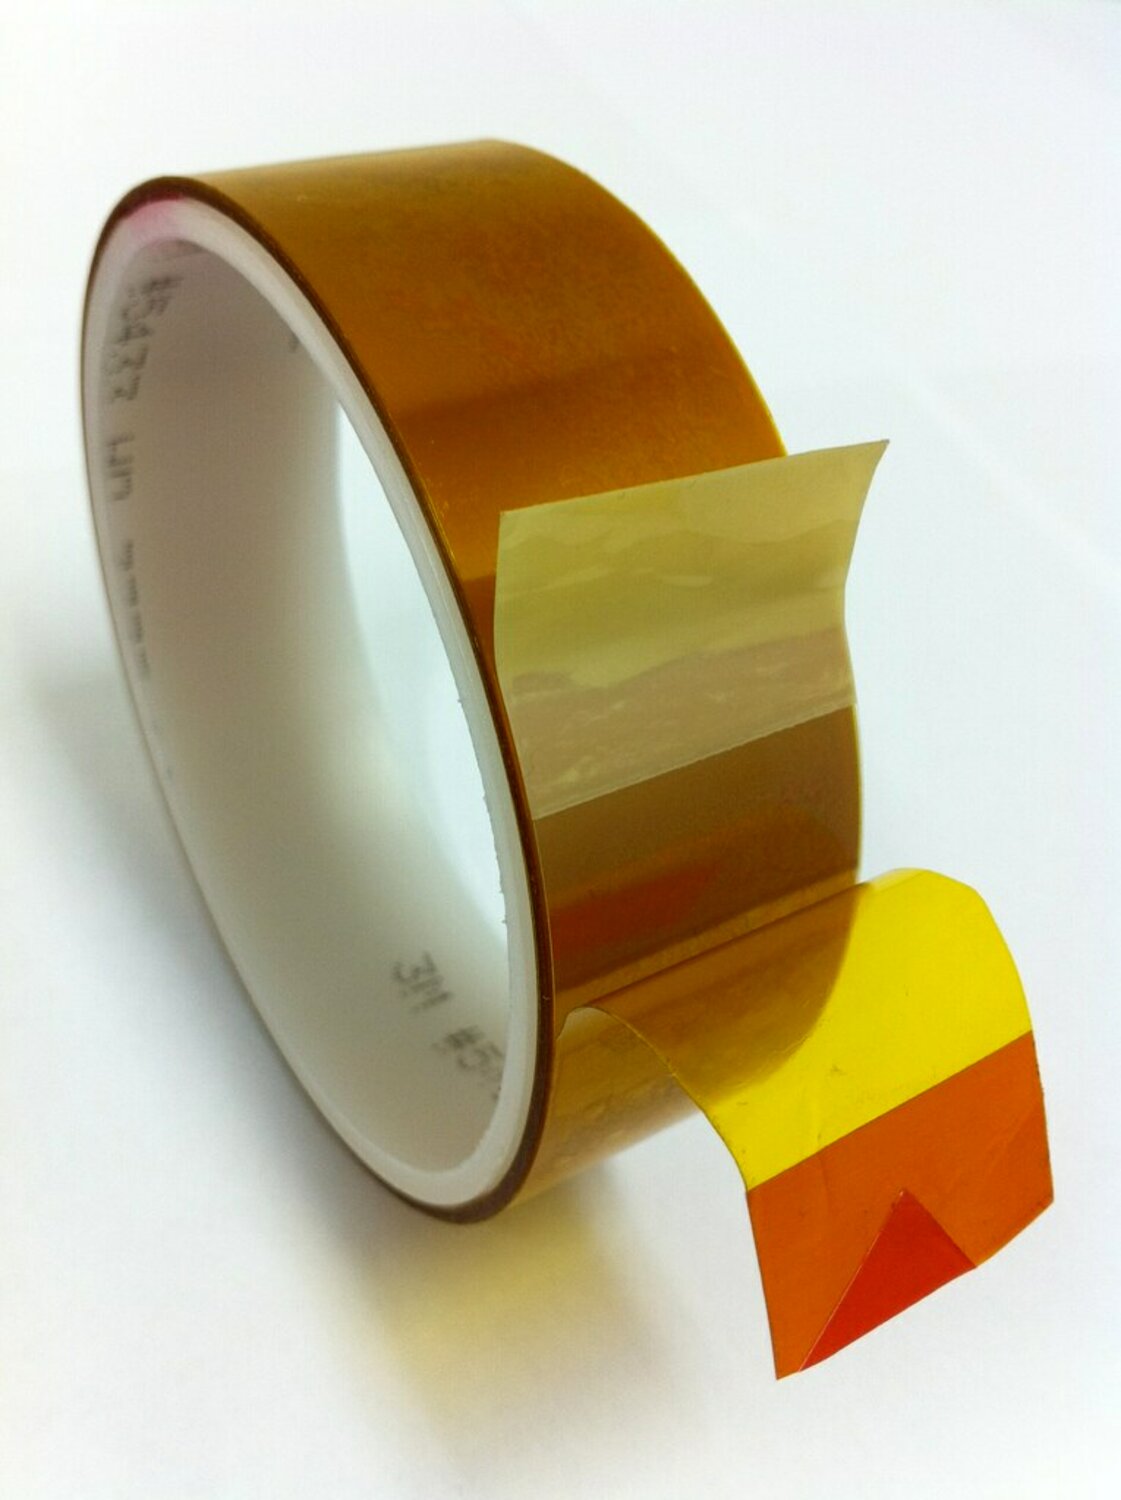 7010373516 - 3M Linered Low-Static Polyimide Film Tape 5433 Amber, 6 in x 36 yds x
2.7 mil, 2/Case, Bulk